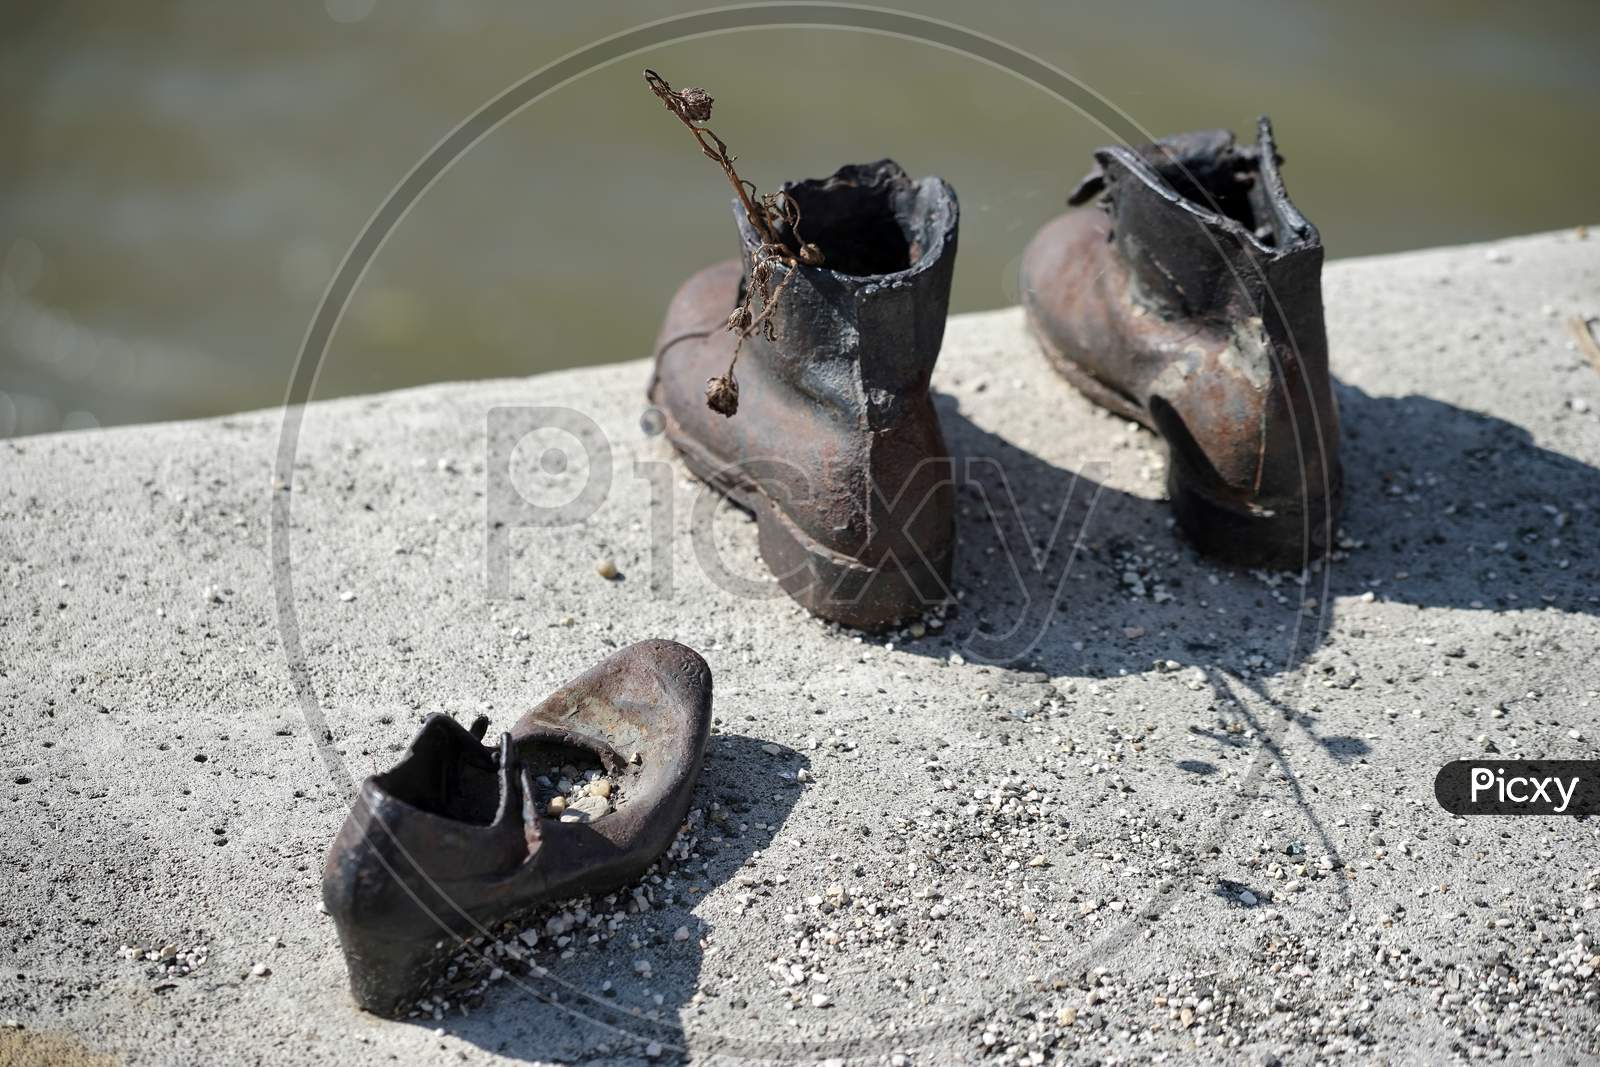 Iron Shoes Memorial To Jewish People Executed Ww2 In Budapest